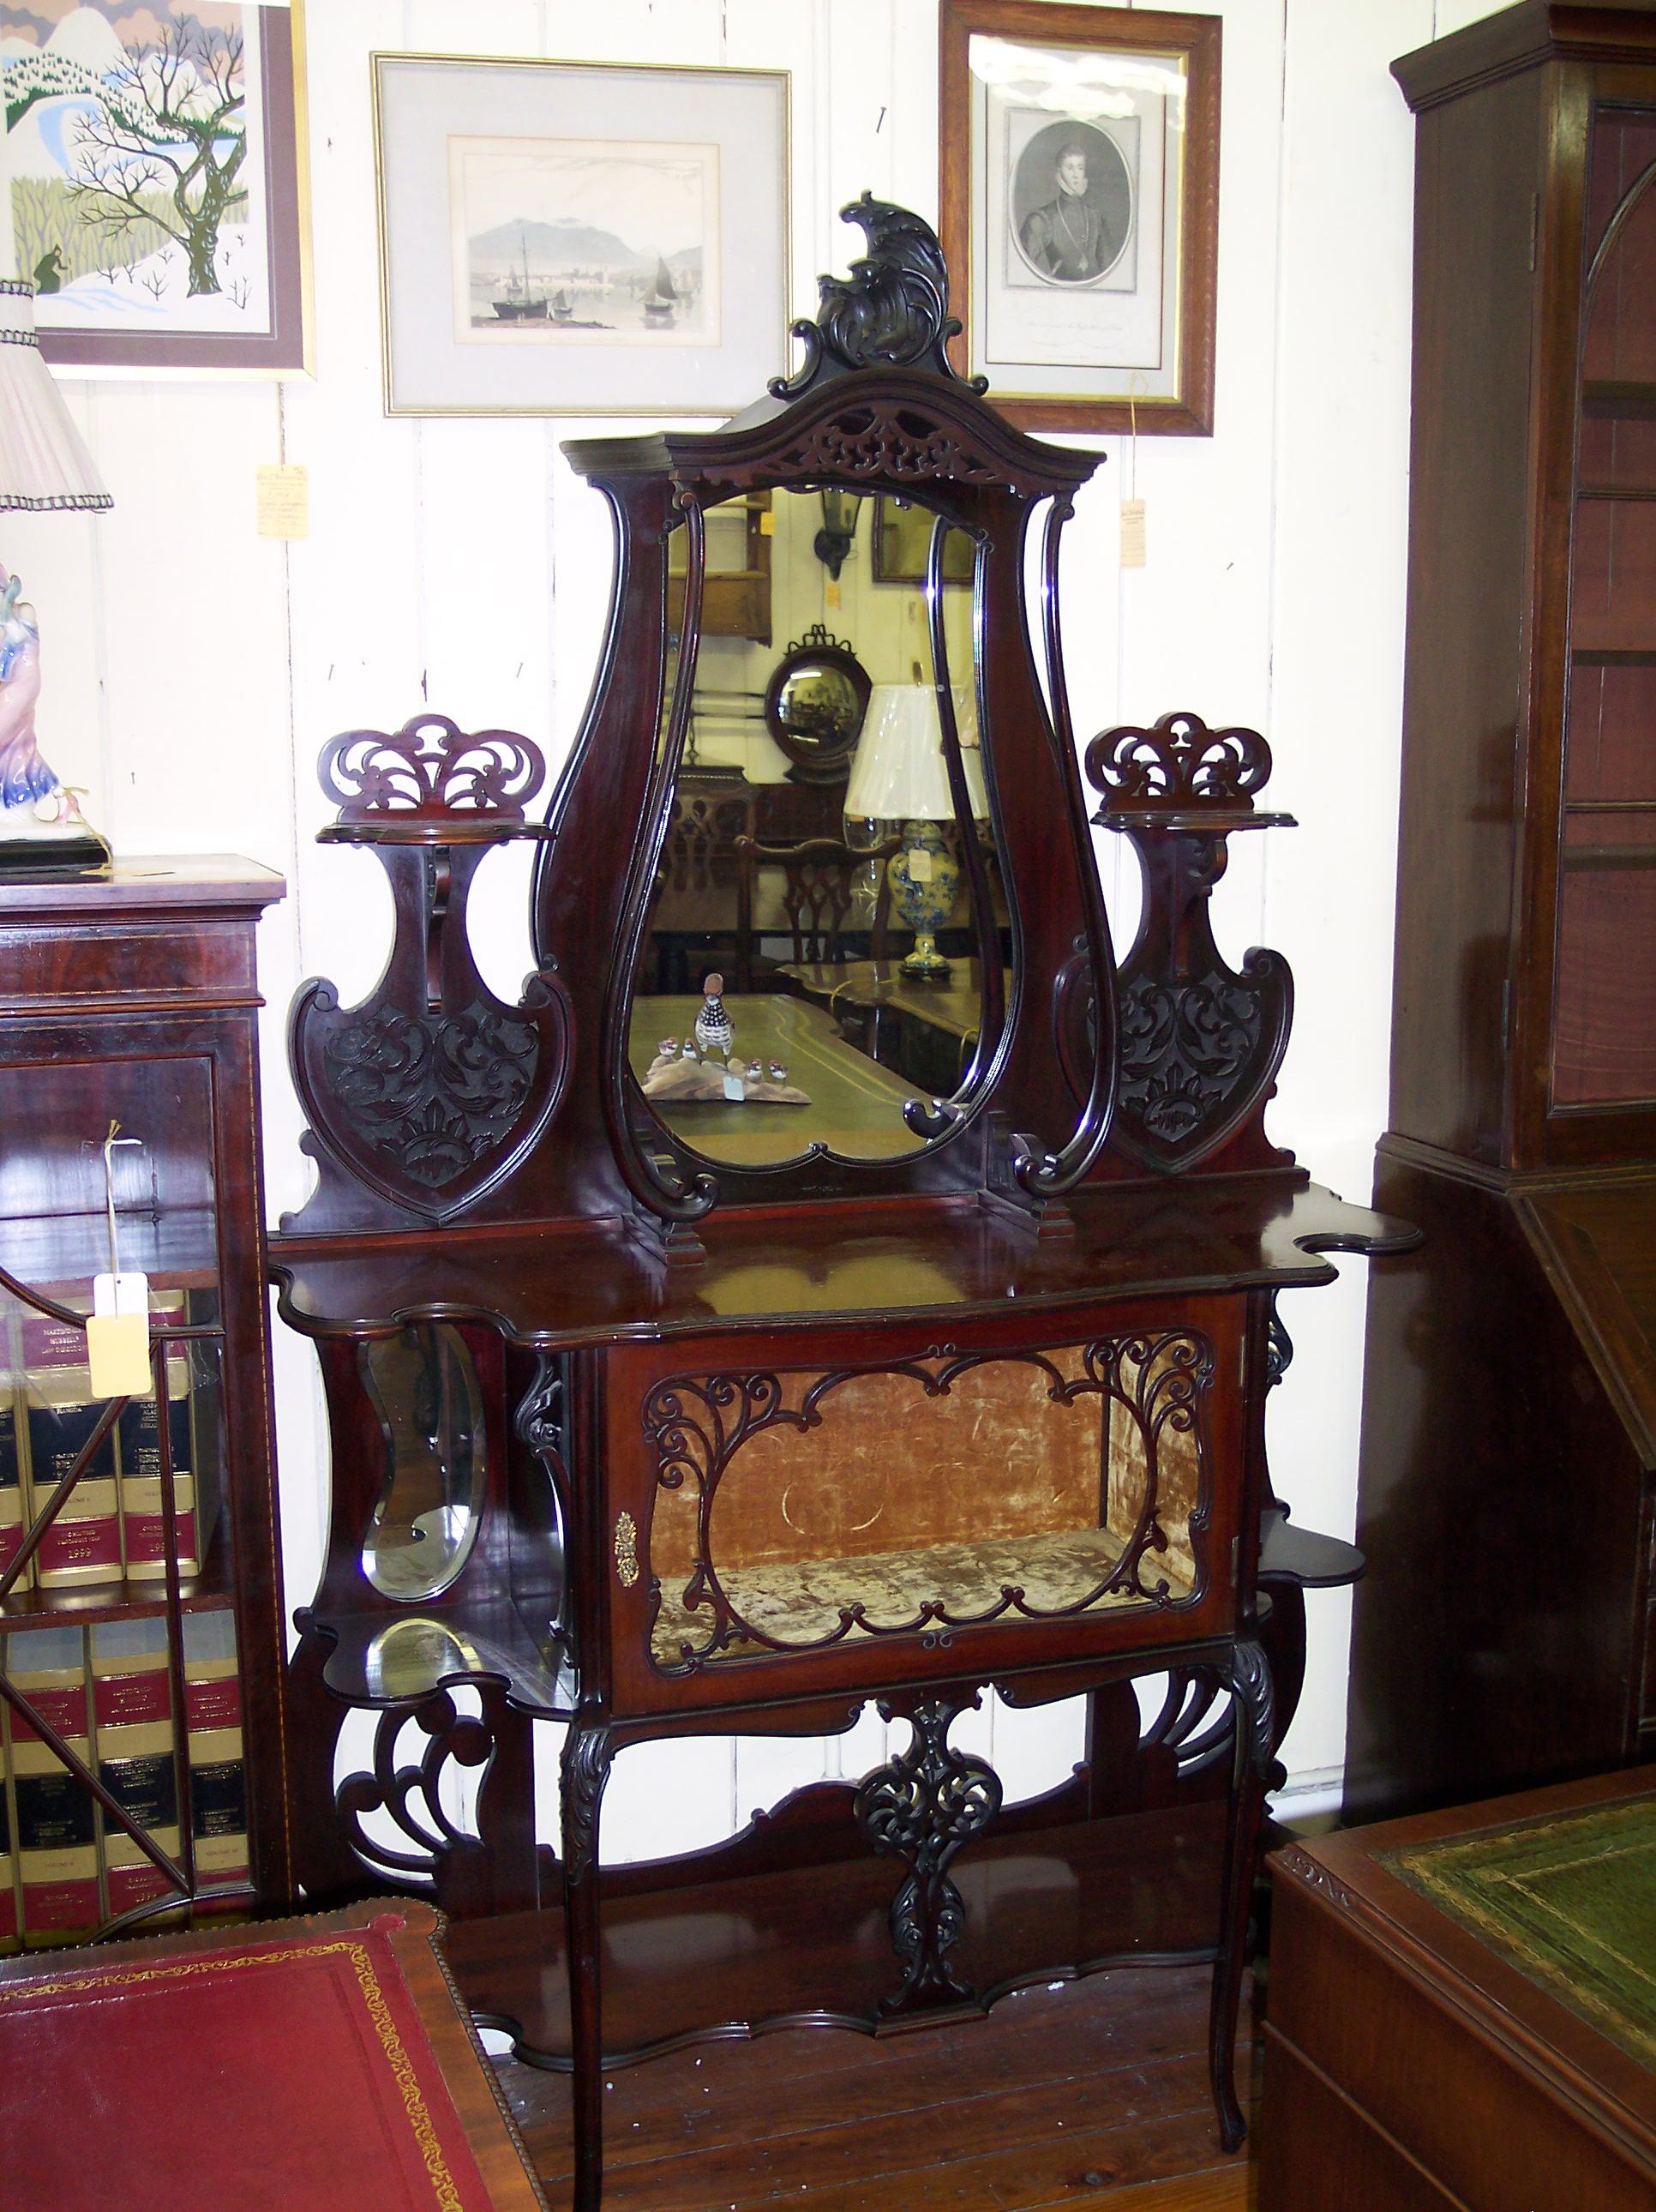 Superbly and intricately hand carved solid mahogany whatnot or display piece with an attached velvet-lined vitrine or specimen cupboard. Handsome fretted and pierced shelves for display. Great condition.
(Decorative pieces shown are not included).